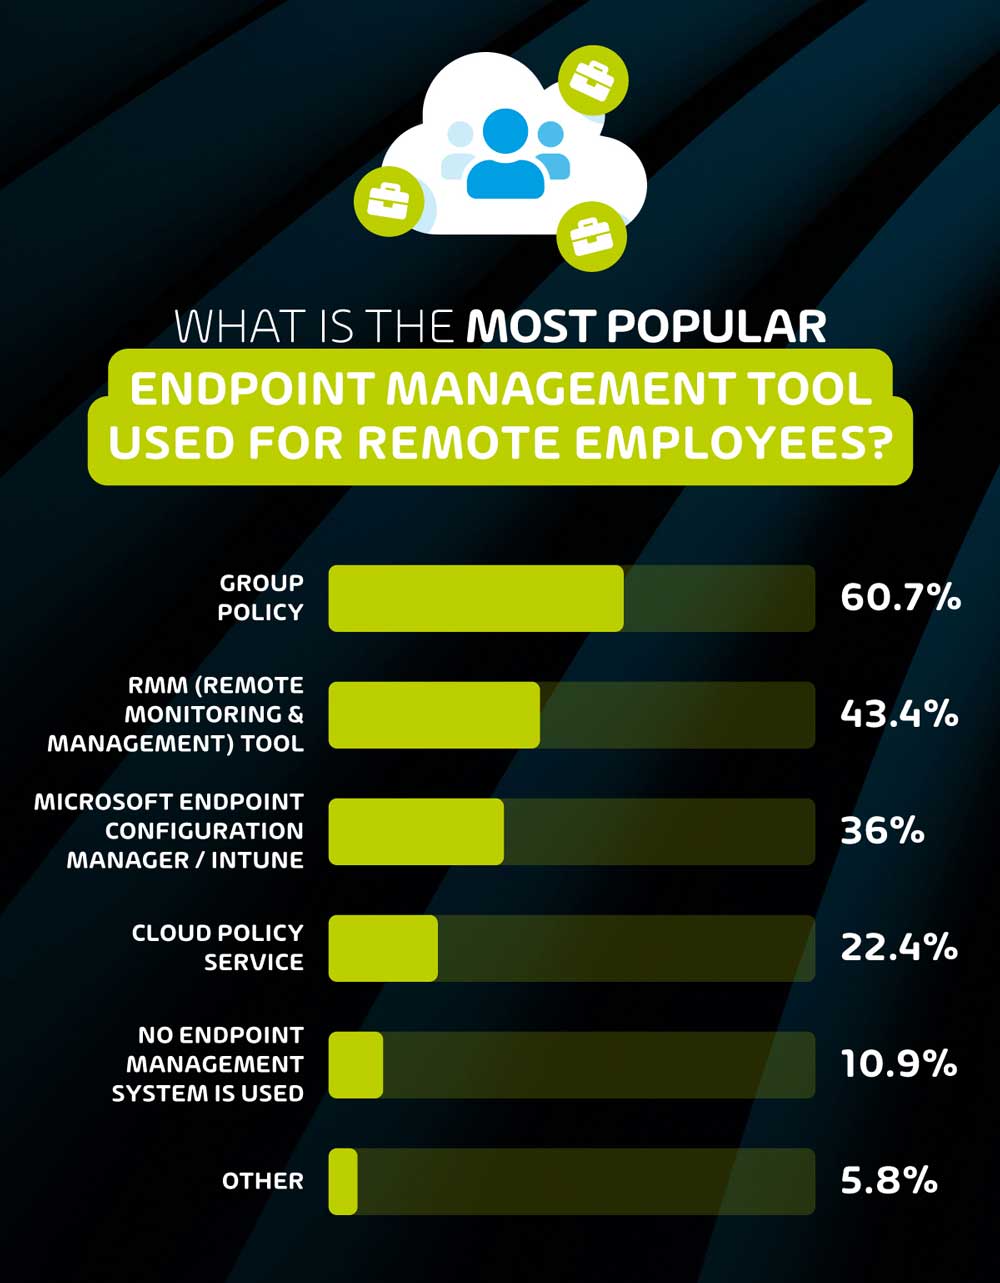 Most popular Endpoint Management Tool used for Remote Employees